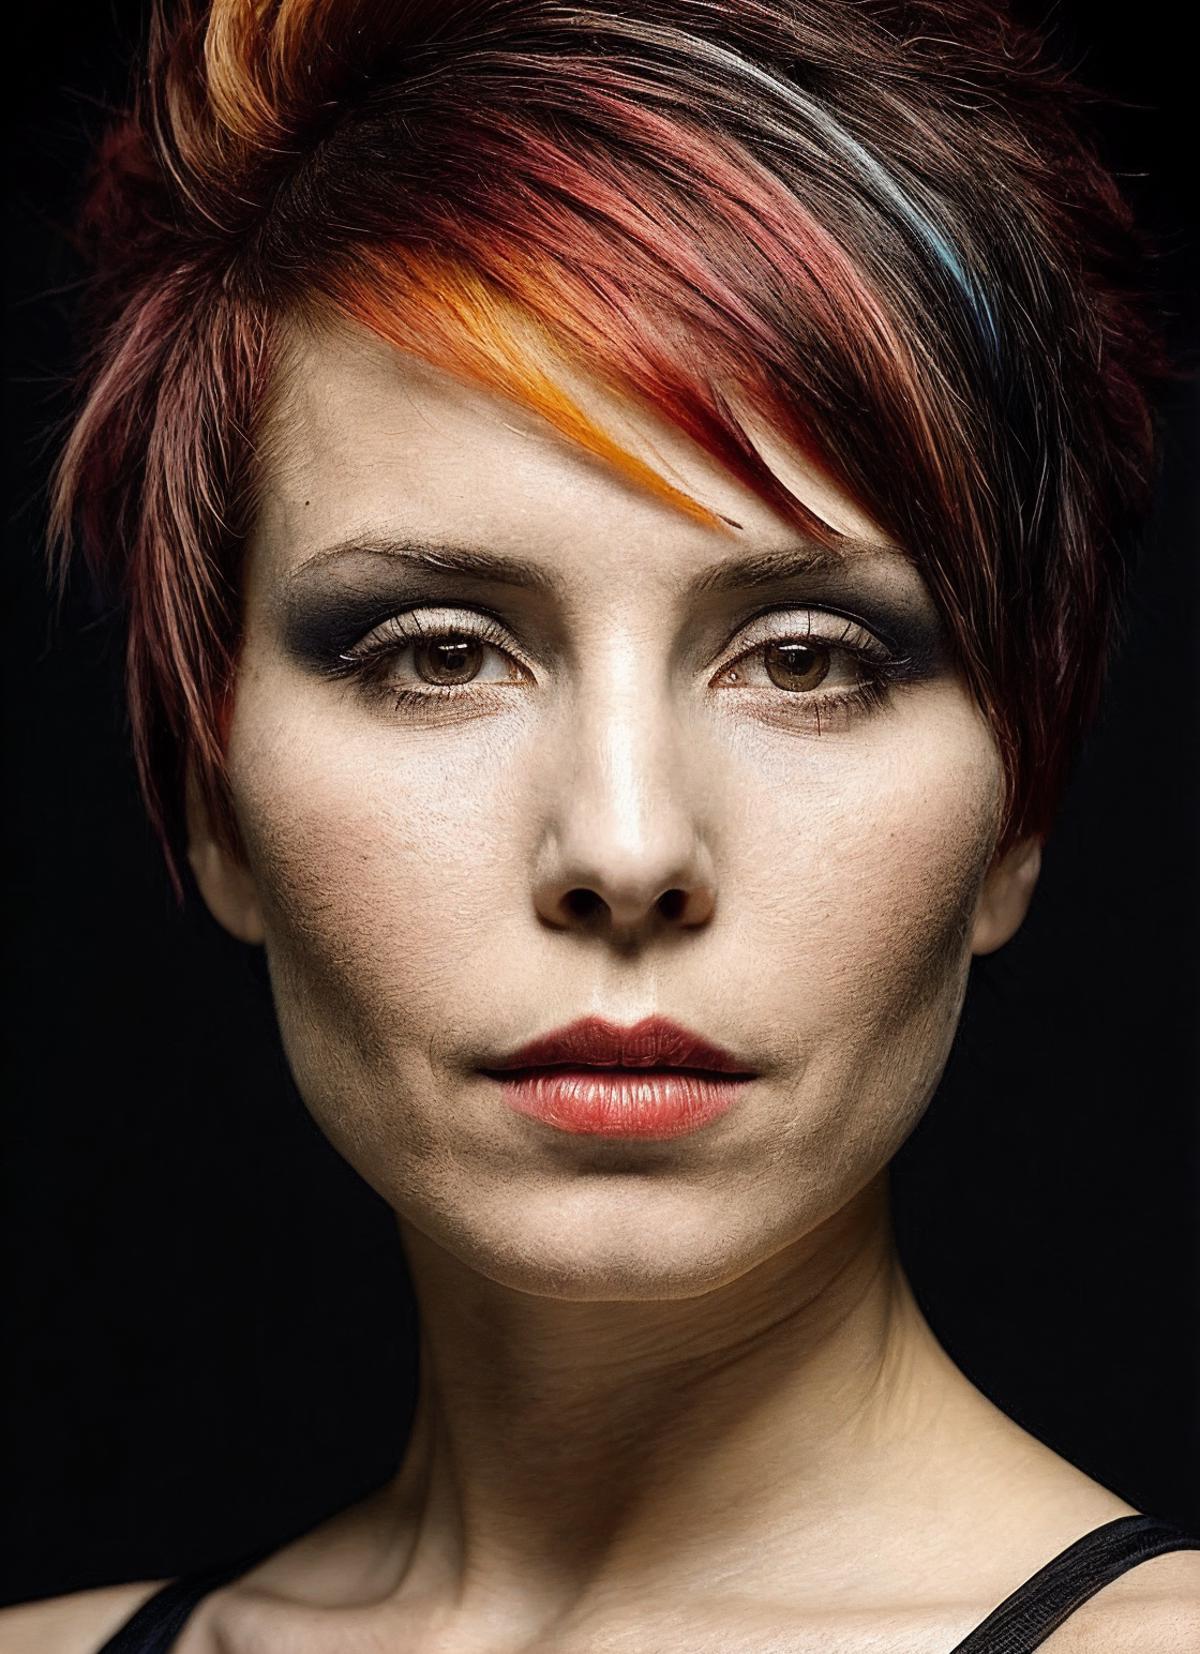 Noomi Rapace image by malcolmrey